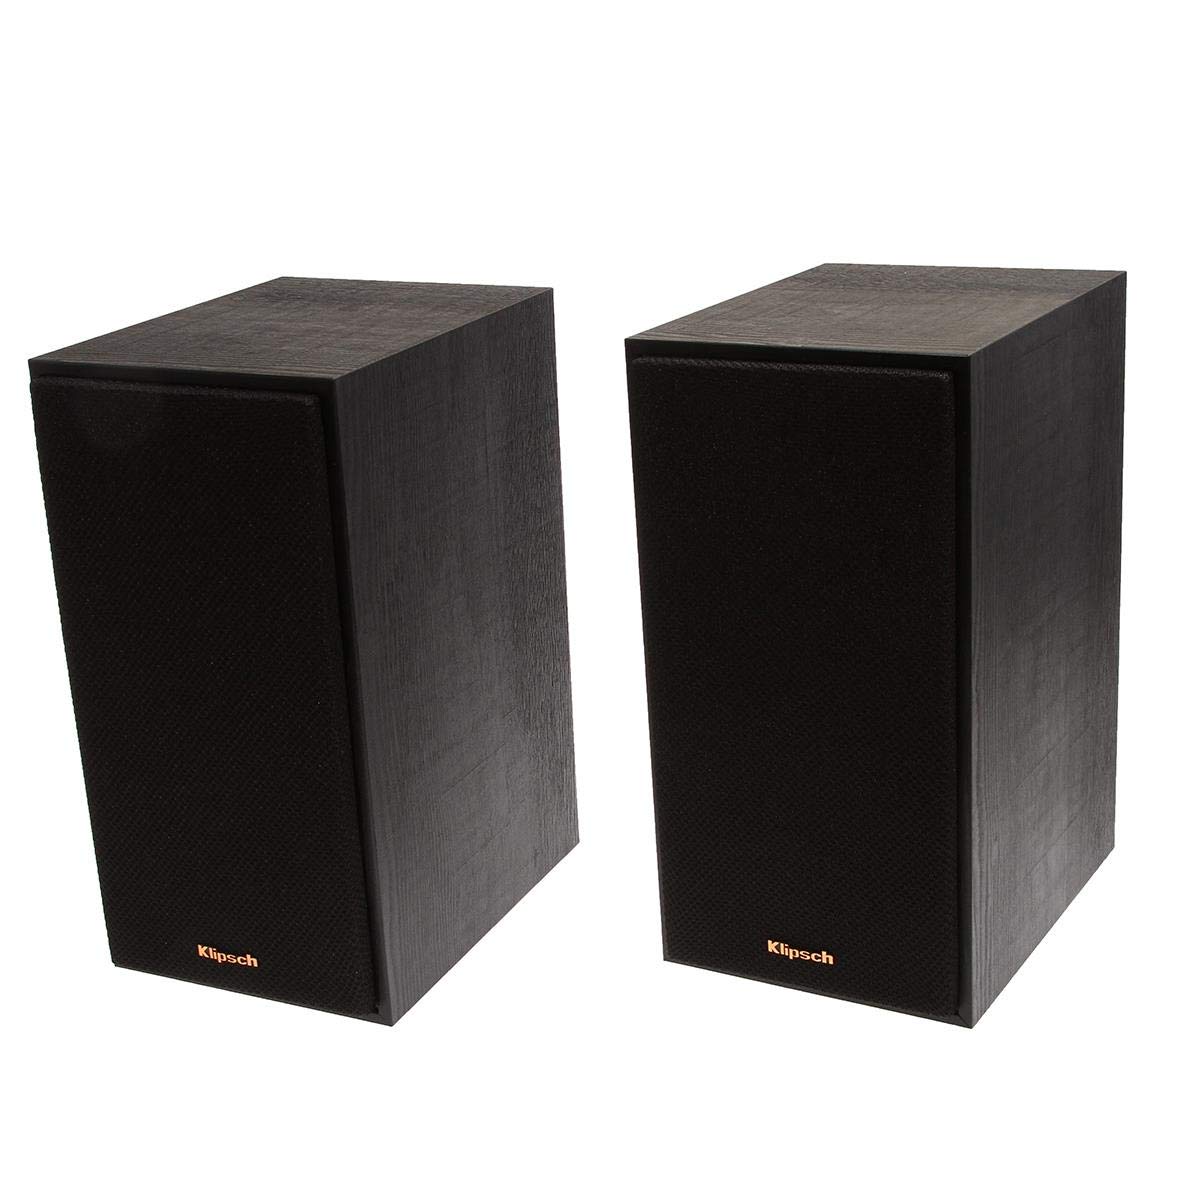 Klipsch Reference R-610F 5.1 Home Theater System, Black with Yamaha RX-V385 5.1 Receiver